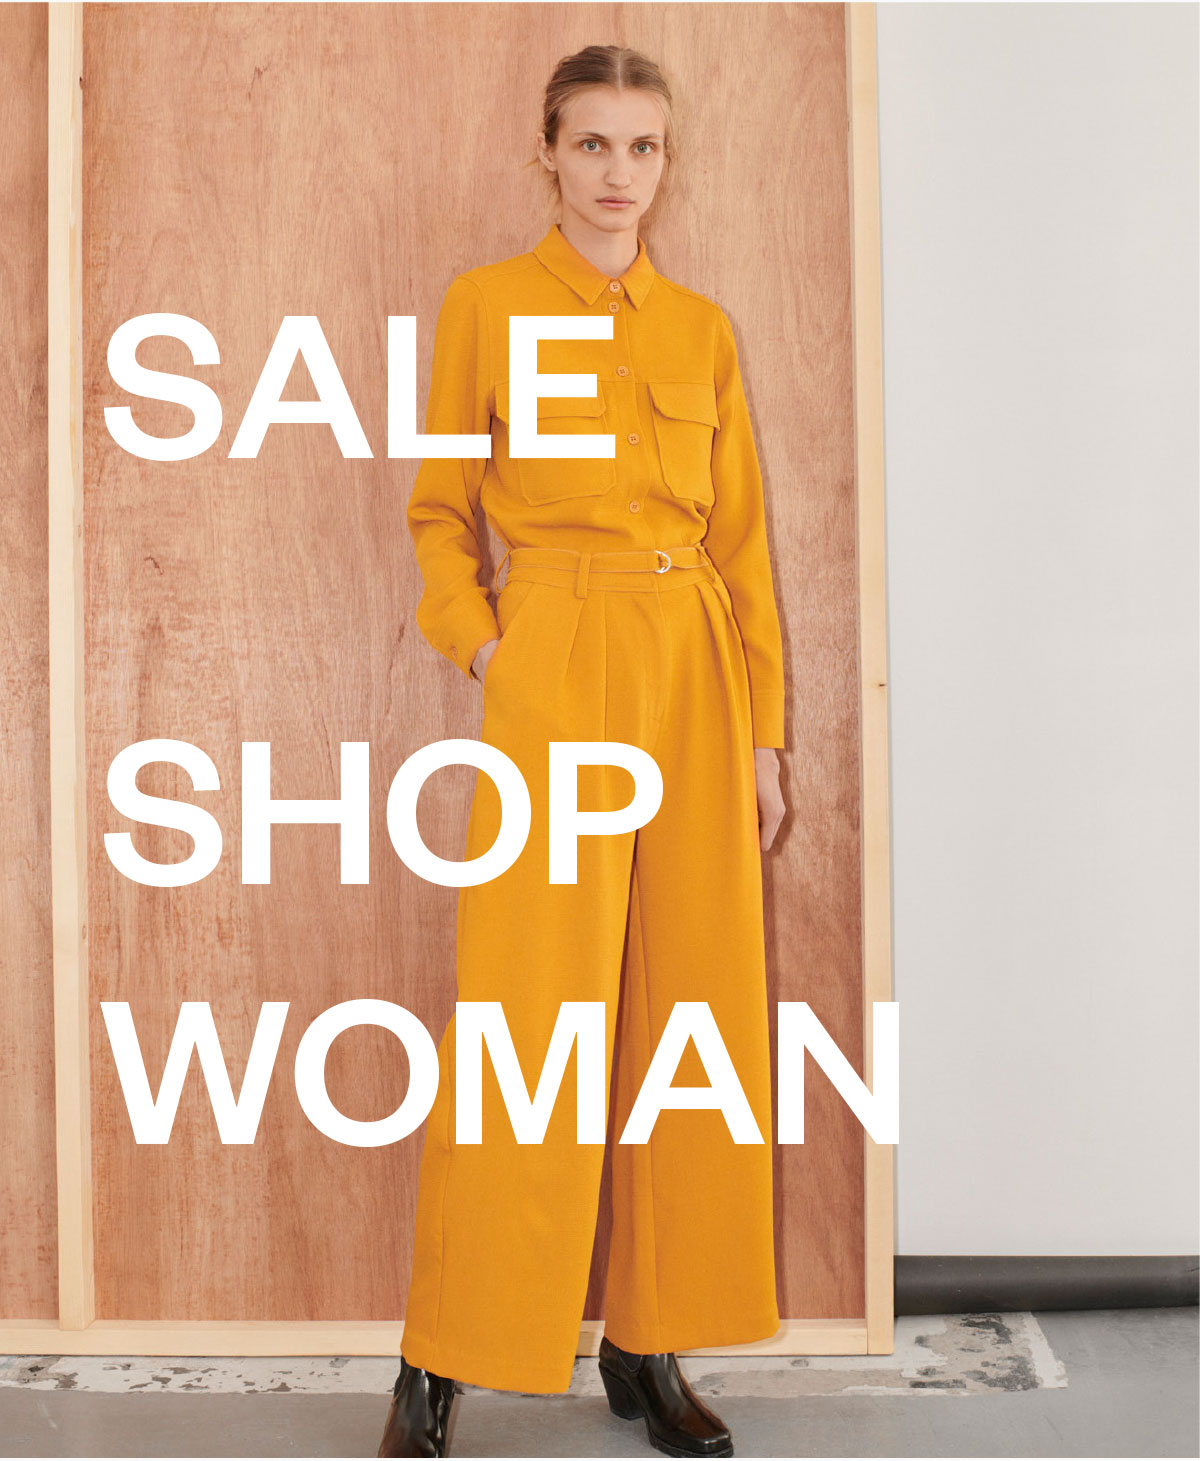 Discover sale woman